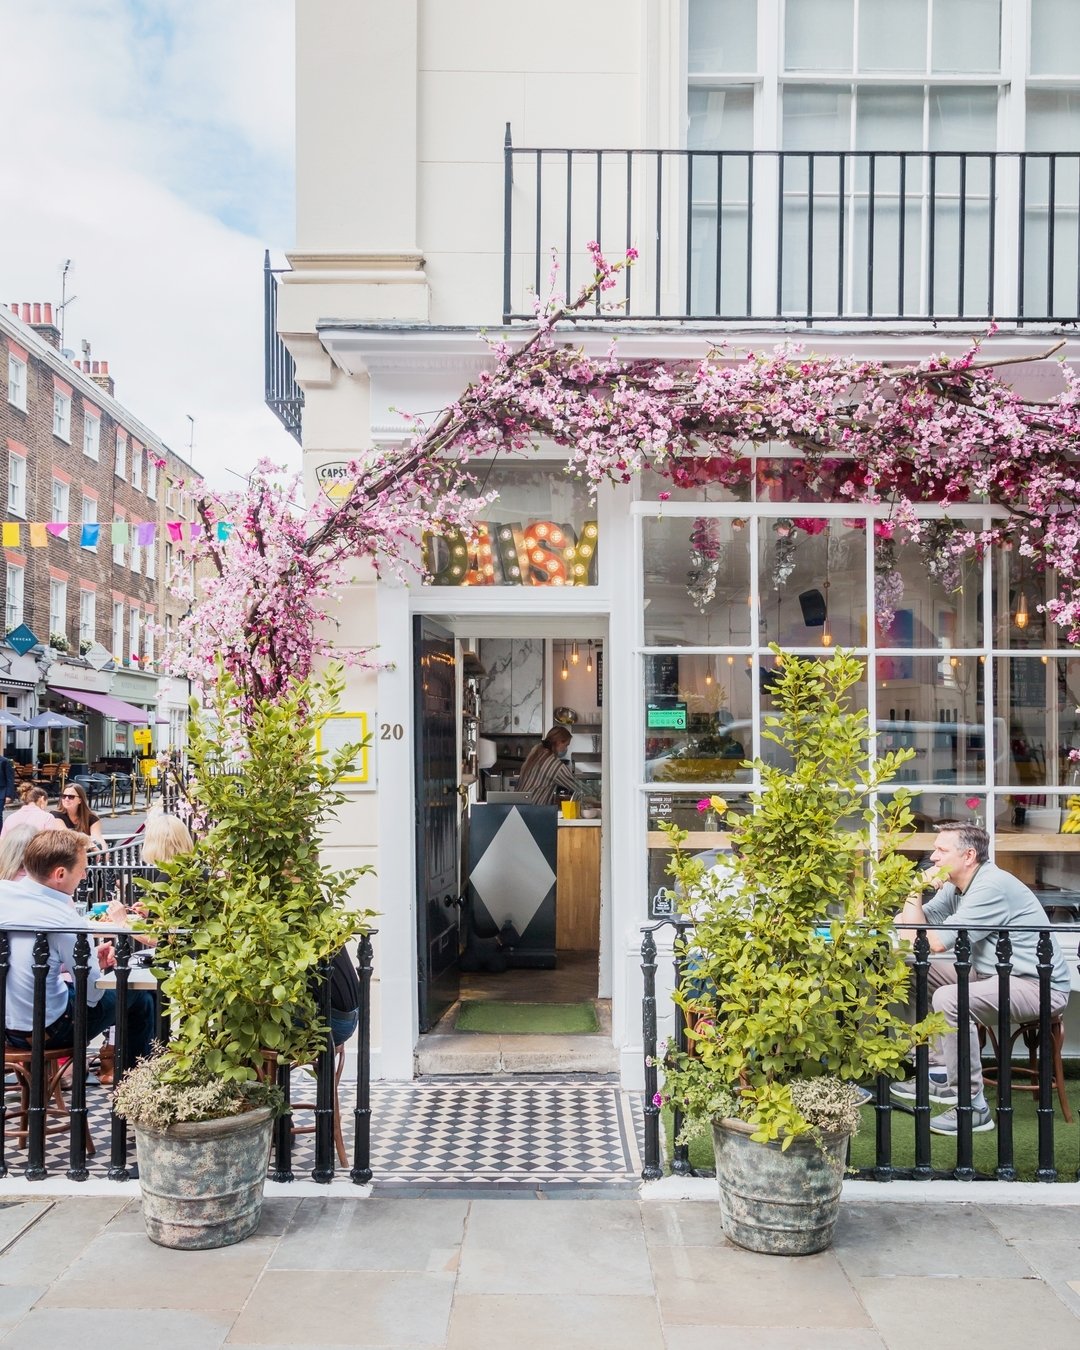 Sunny mornings and uplifting coffees at our beautiful cafe, the original Daisy Green! 🌸☀️

We fell in love with the quaint corner location and the village feel of Portman village in Central London.🇬🇧

The Grade II listed building, a former real es